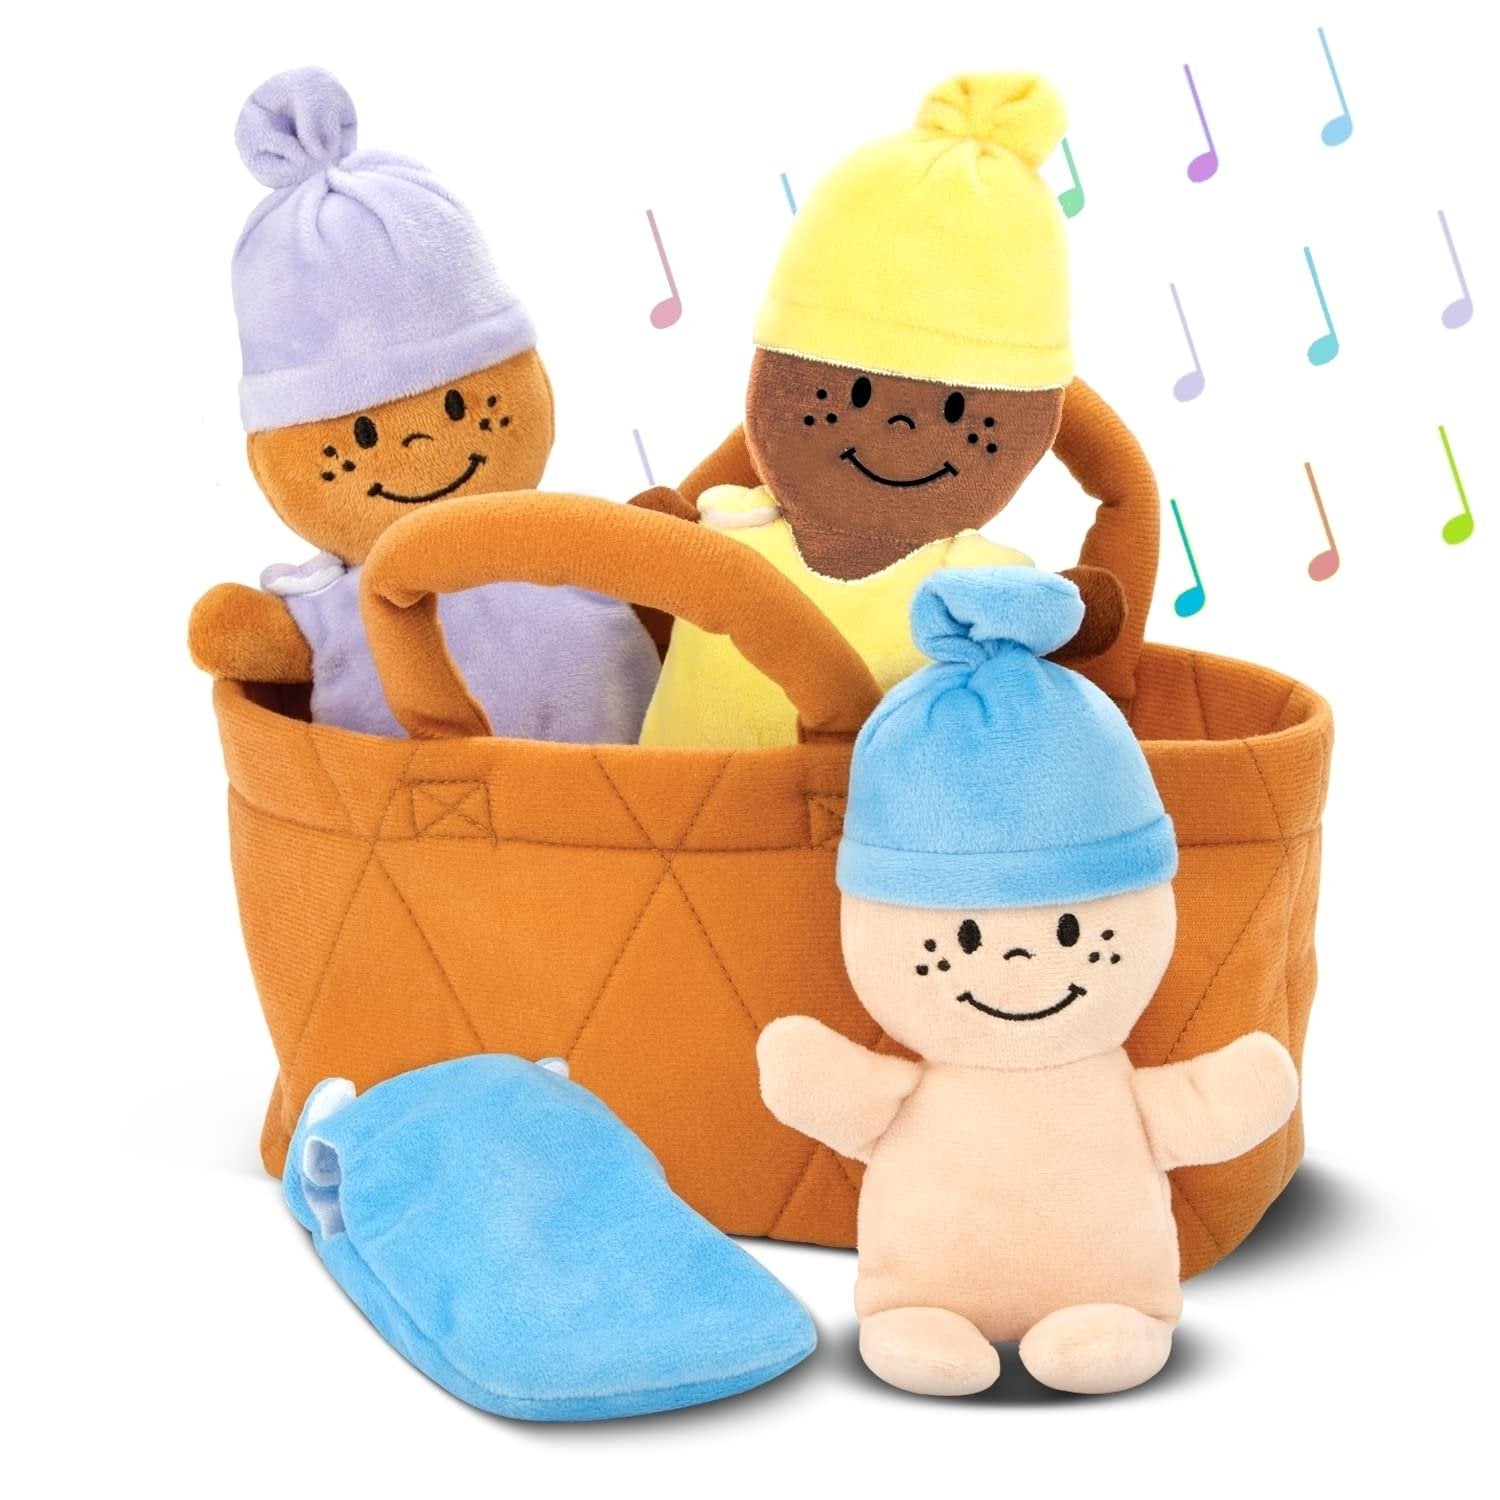 Bundaloo Basket of Babies with Realistic Giggling Sounds - Plush Baby Doll Set with Carrier - 3 Multicultural Dress Up Dolls Playset